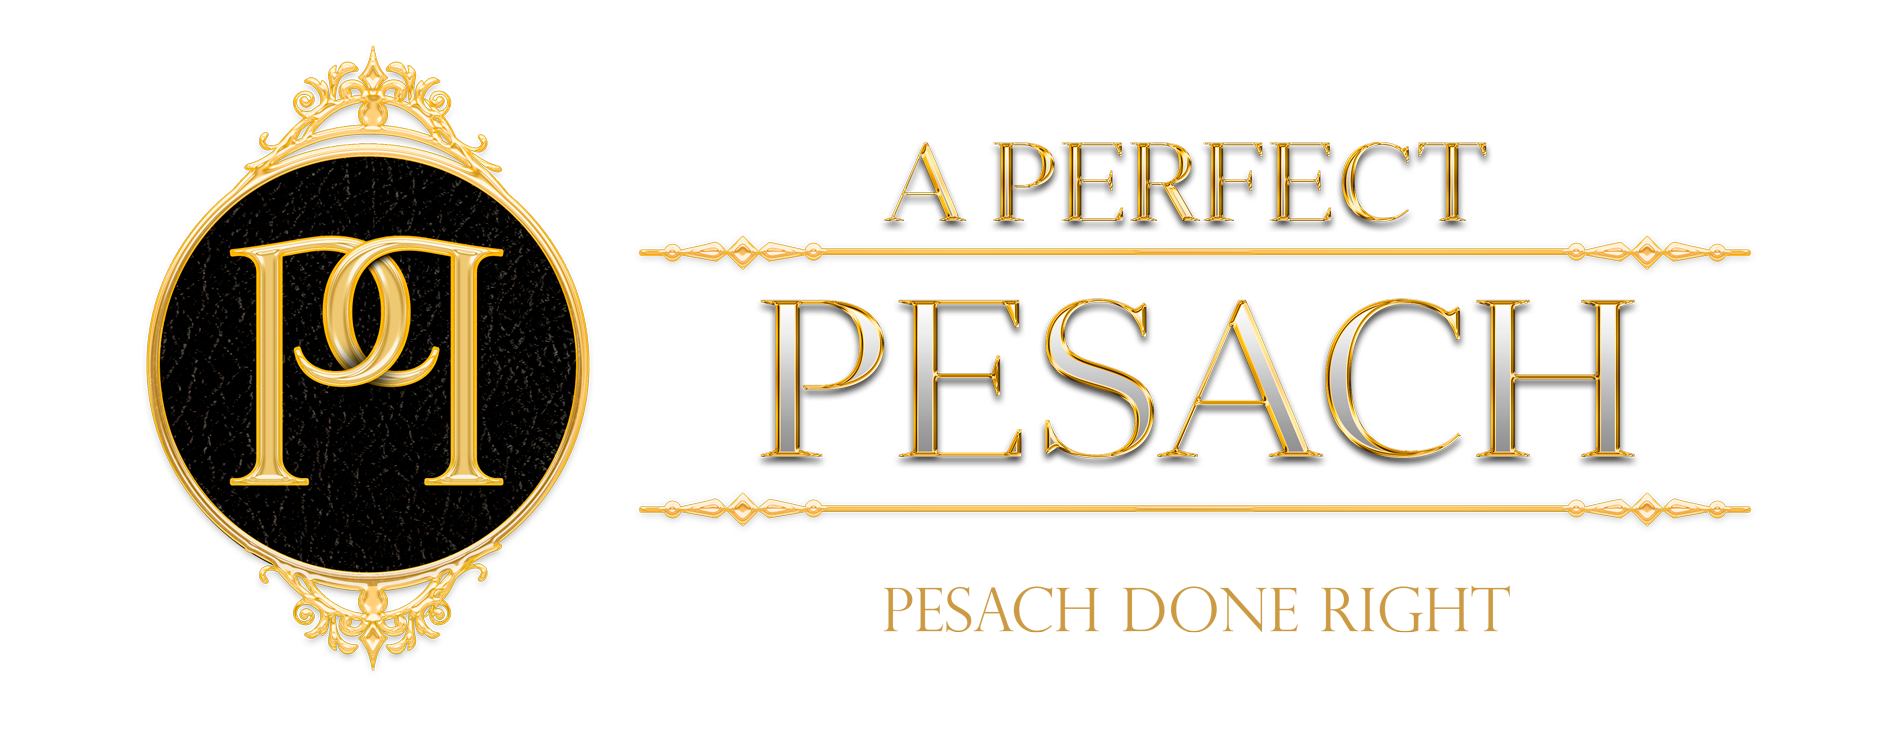 A PERFECT PESACH